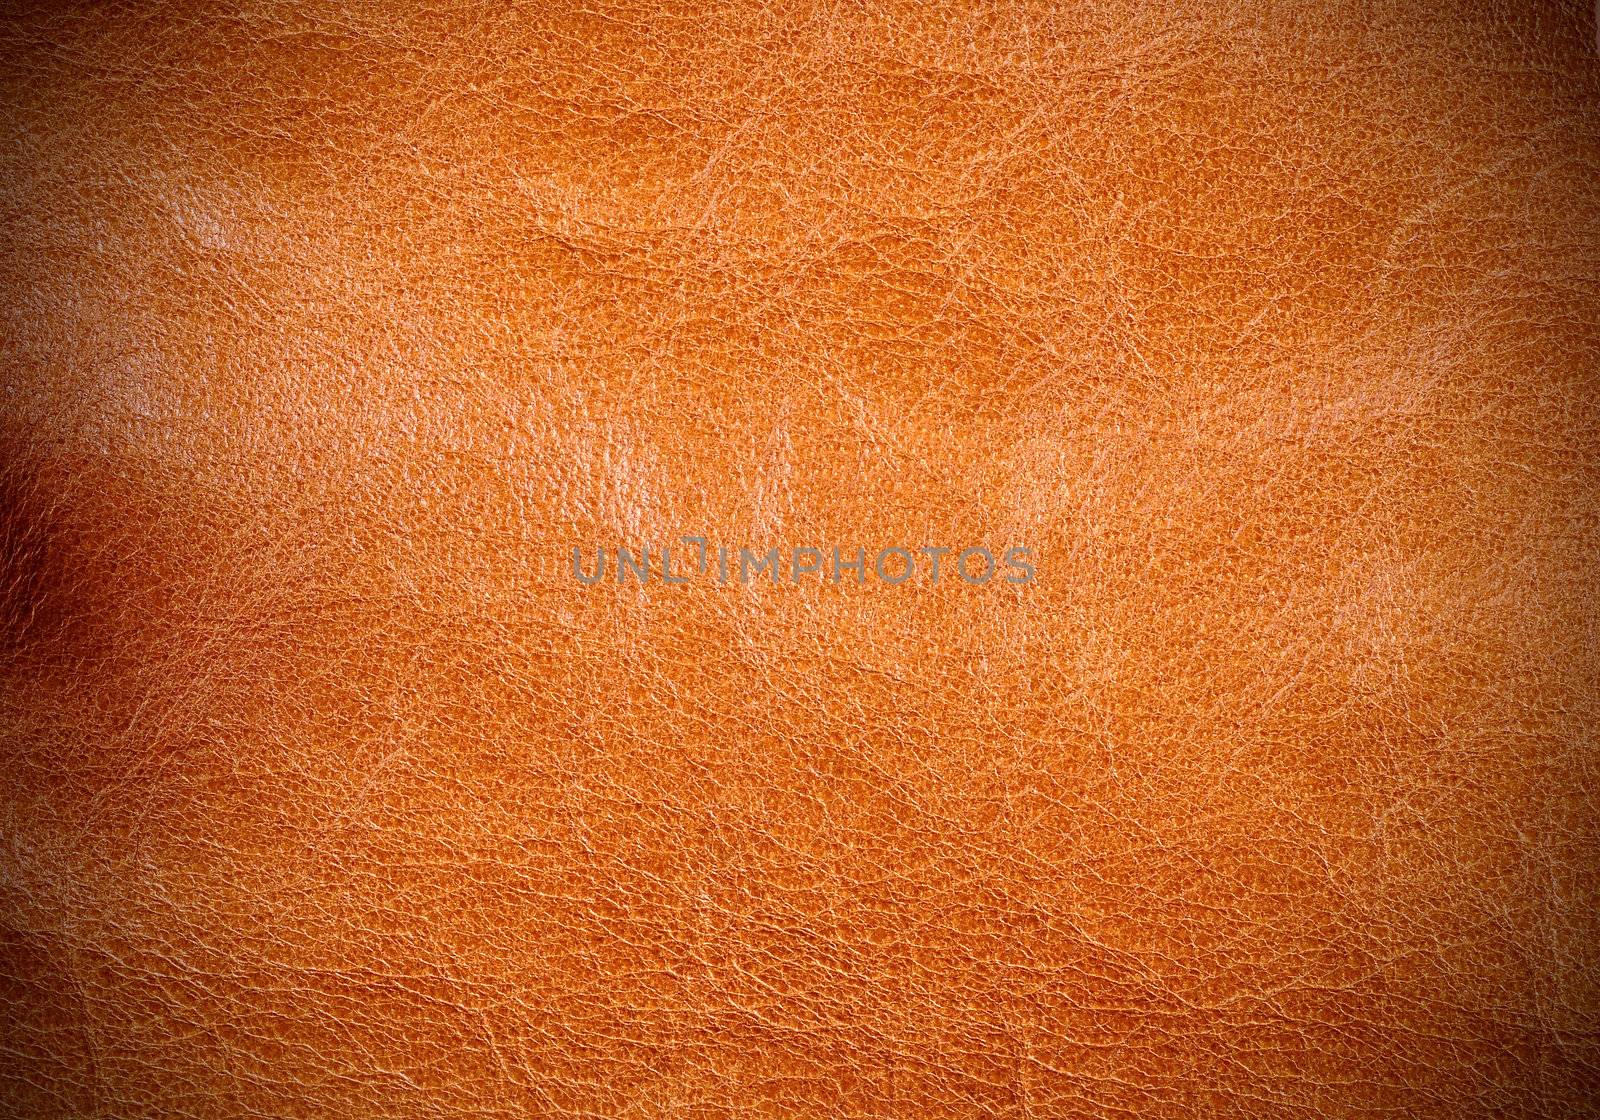 Light brown leather texture with vignetting on the corners